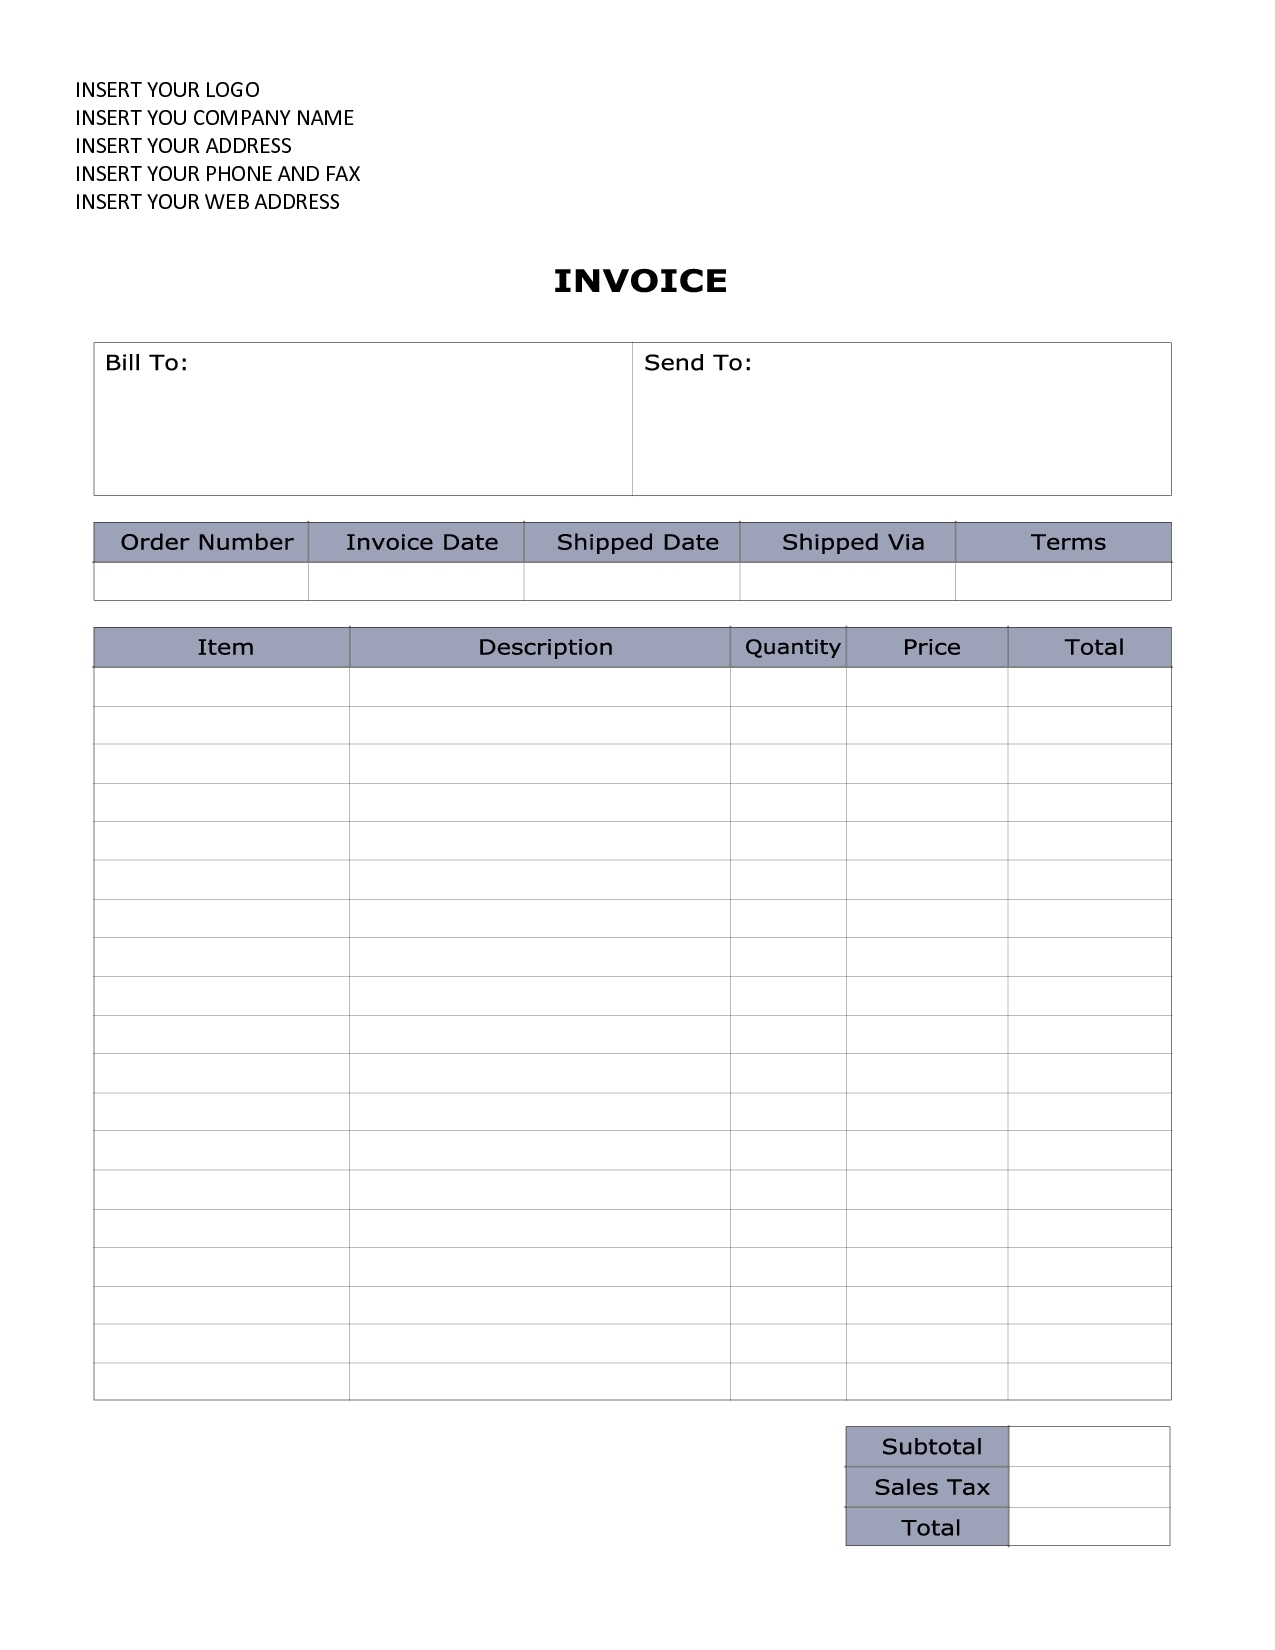 free invoice template in word invoice template word invoice template free 2016 1275 X 1650